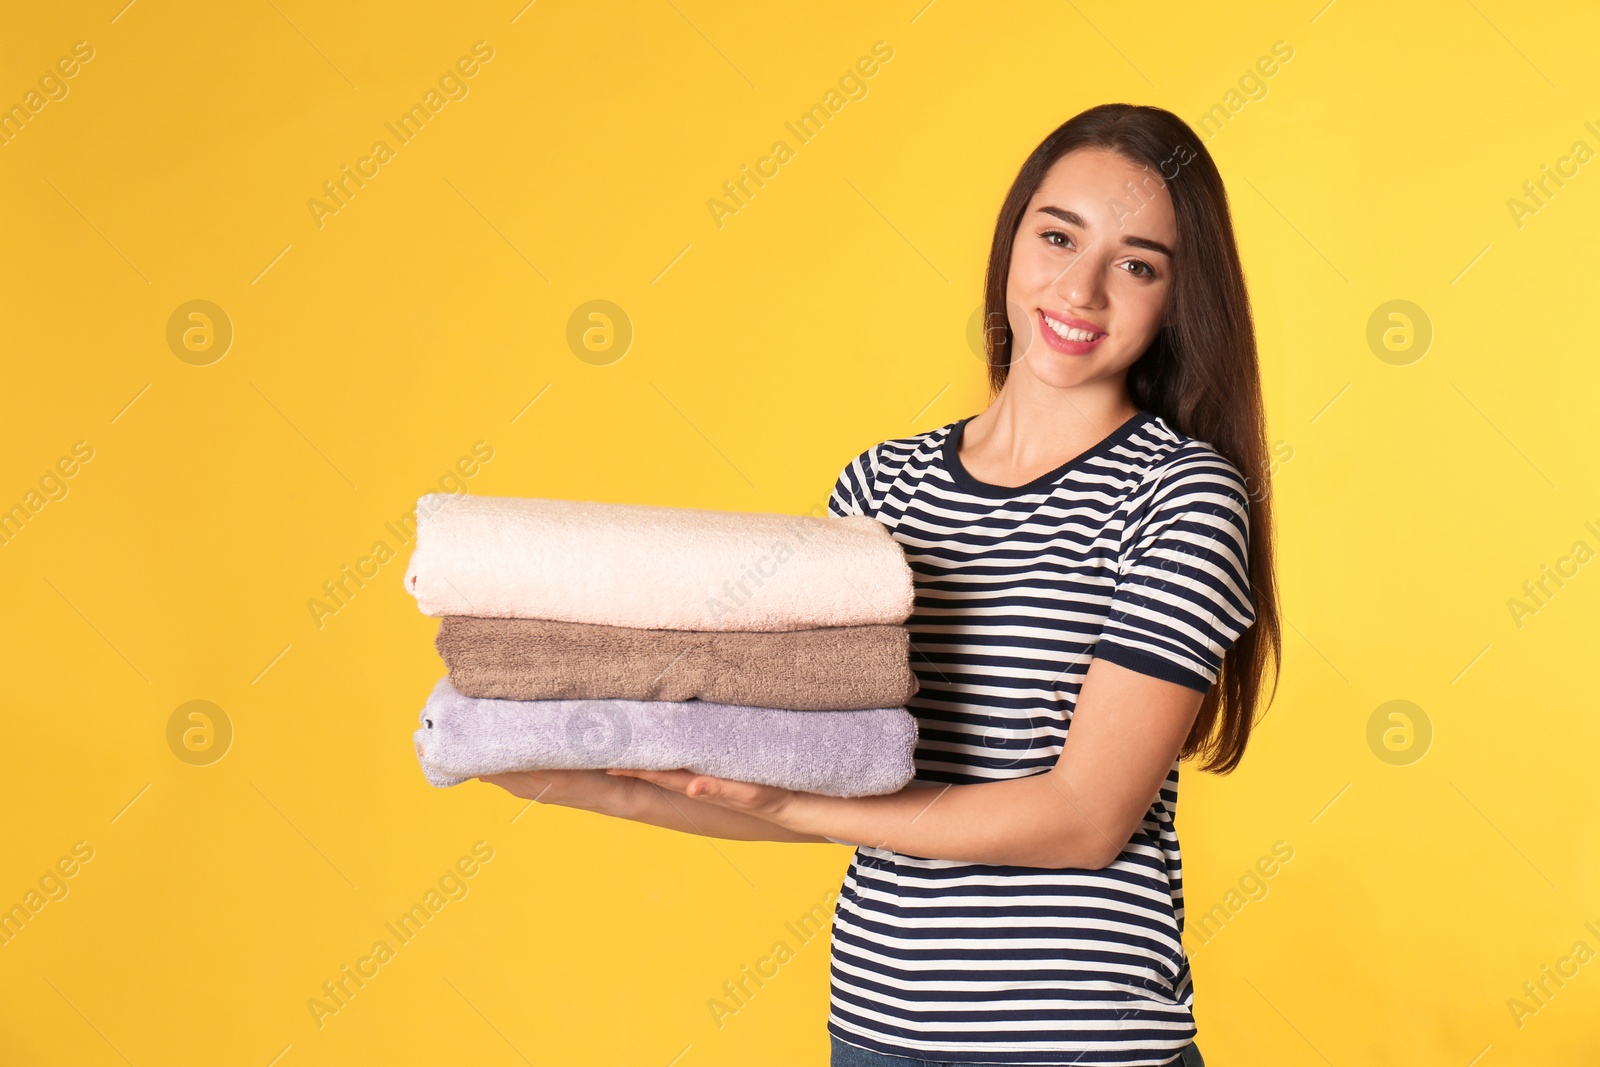 Photo of Happy young woman holding clean laundry on color background